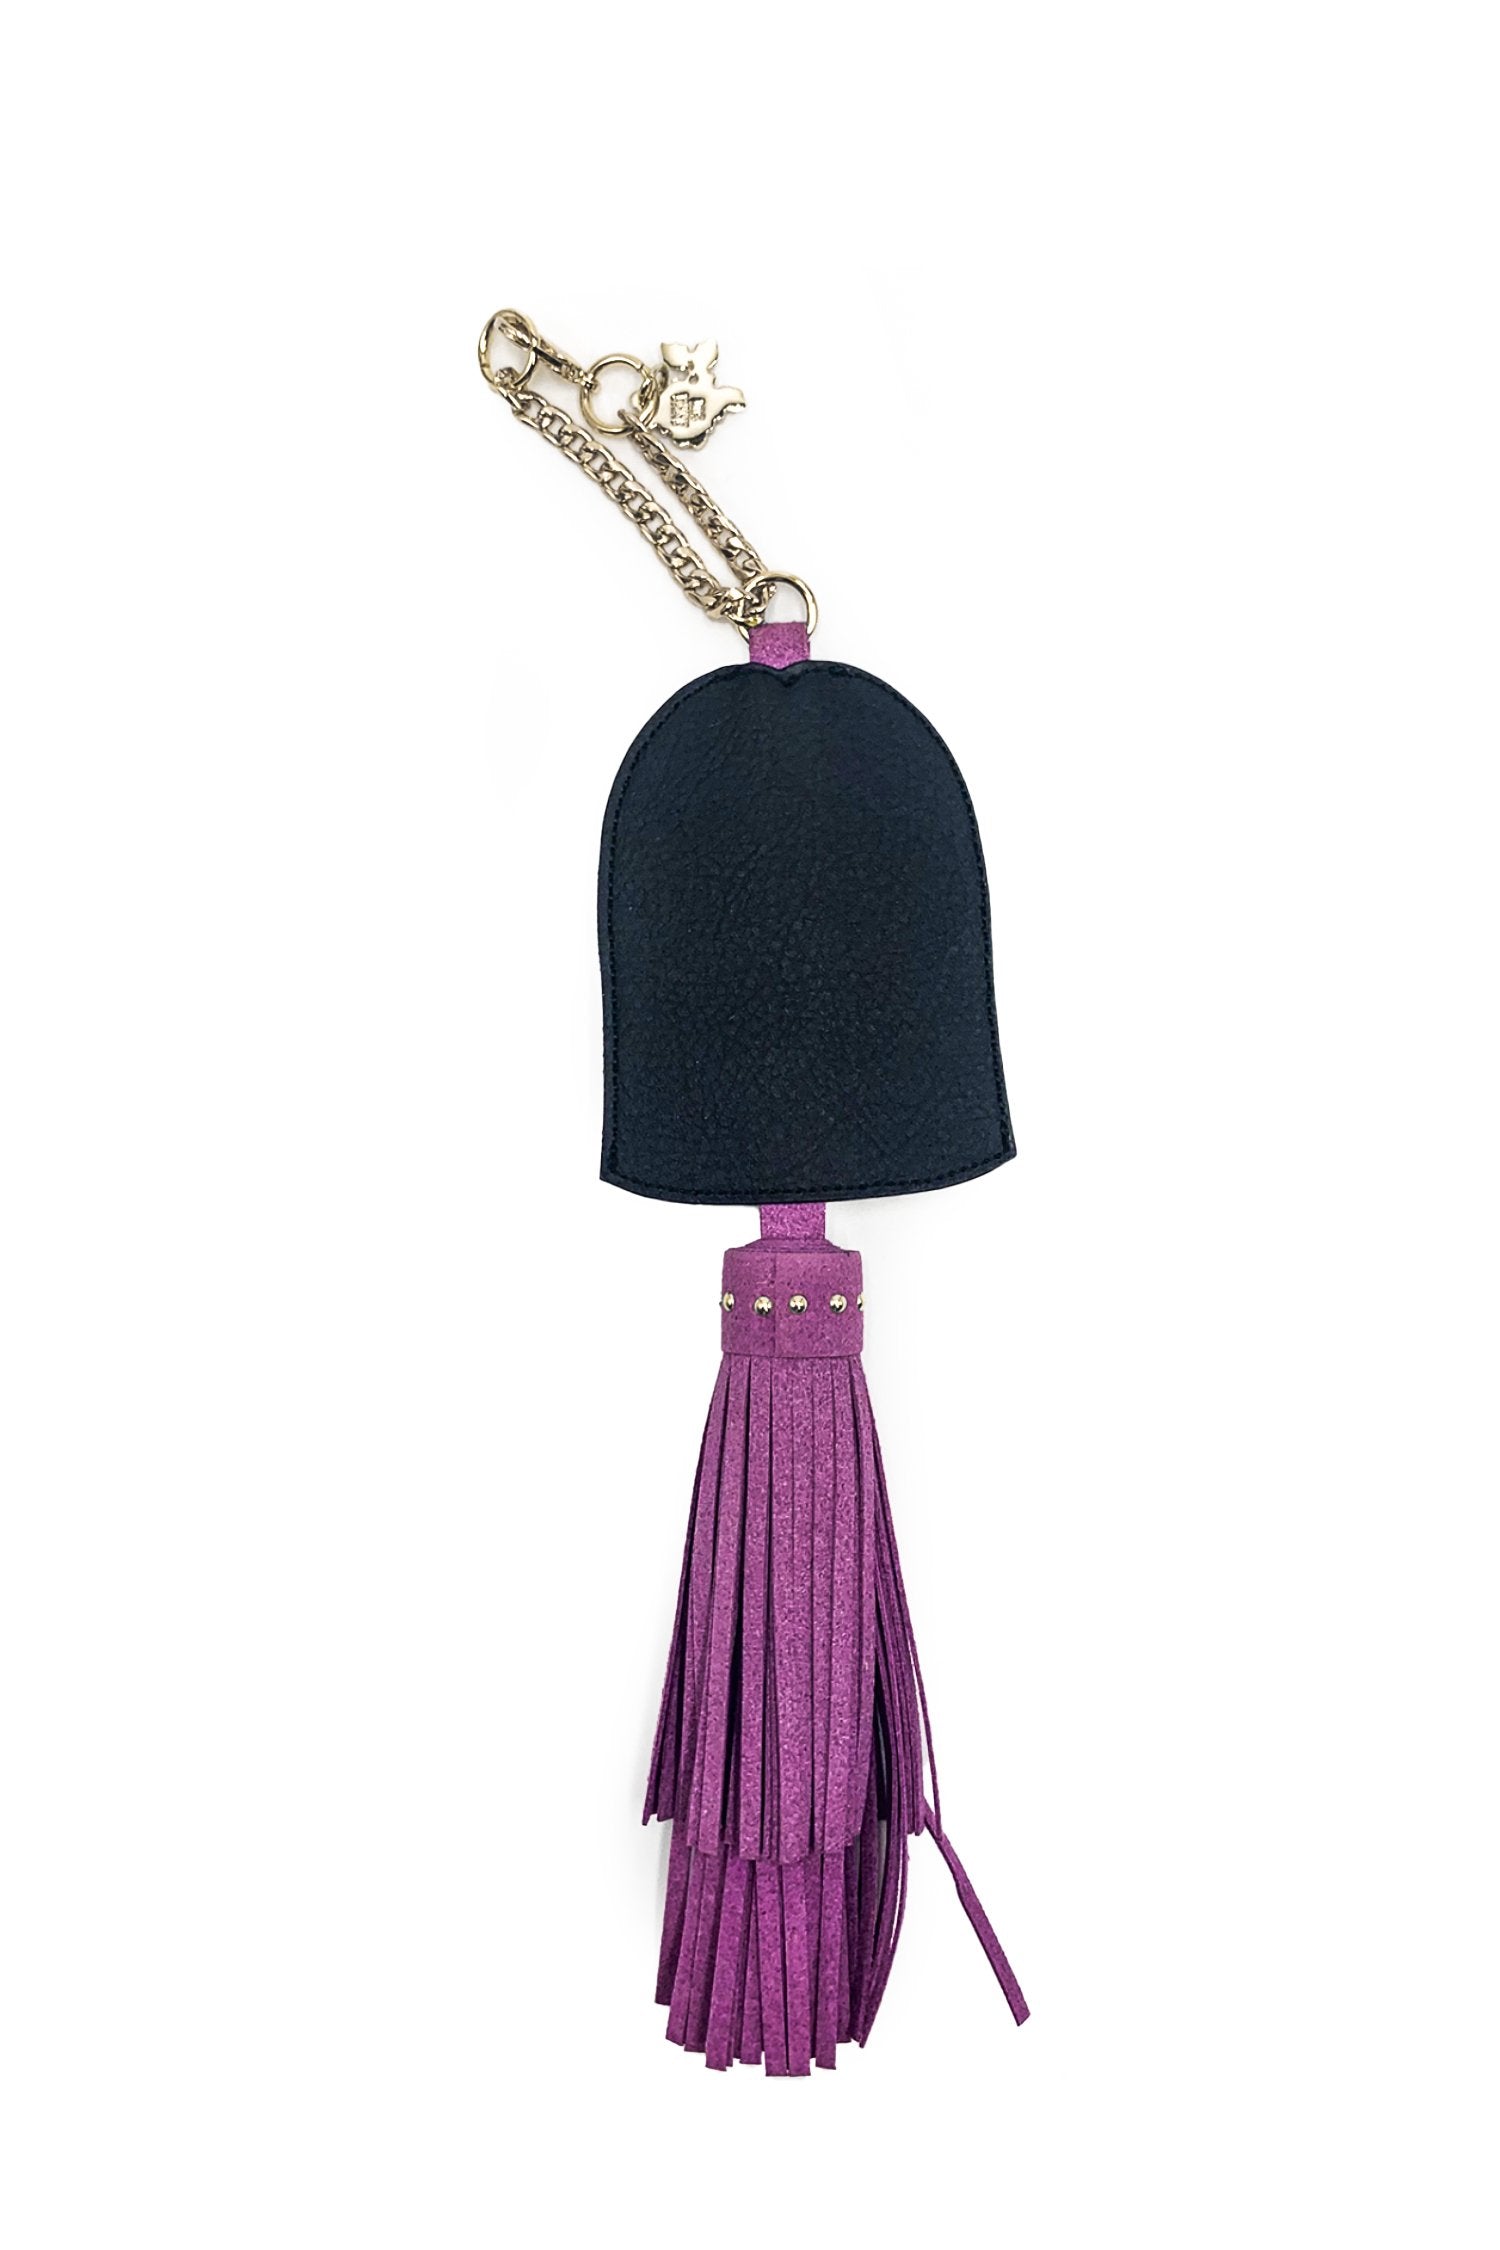 Anna Sui Face Charm, chain to attach on mini bag, black hair, body is in small purple leather strips